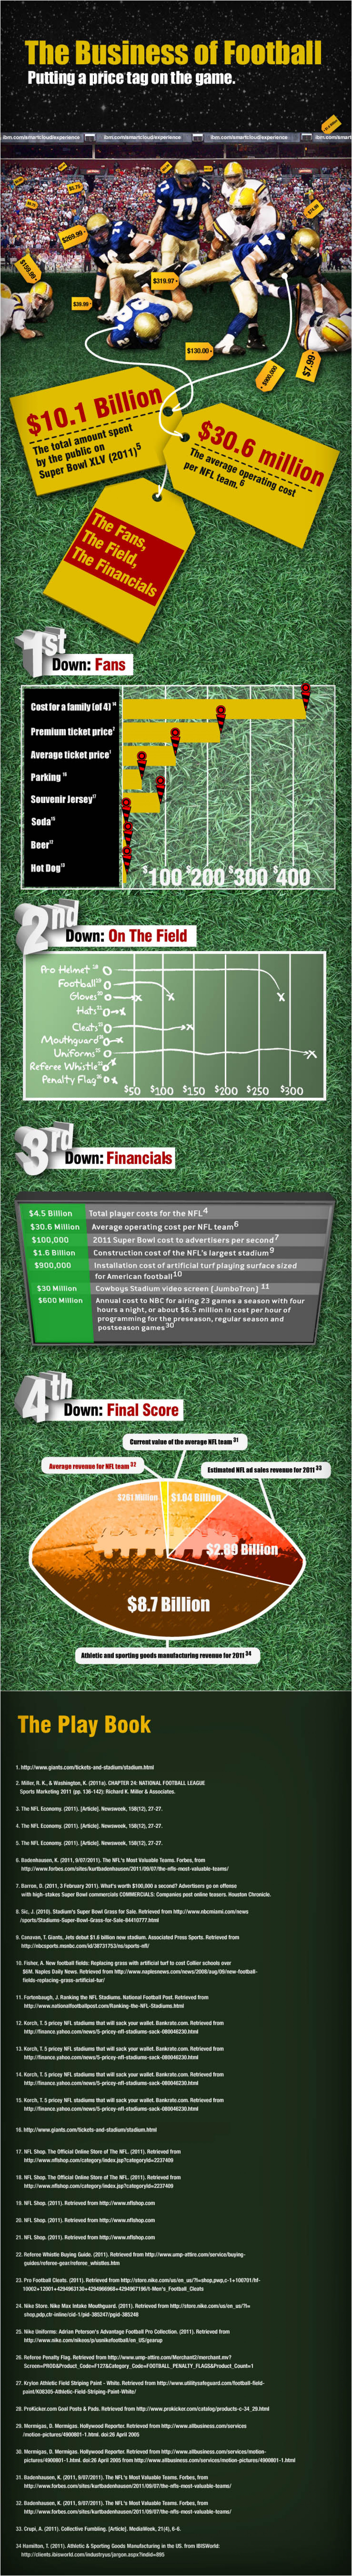 The Business of Football Infographic